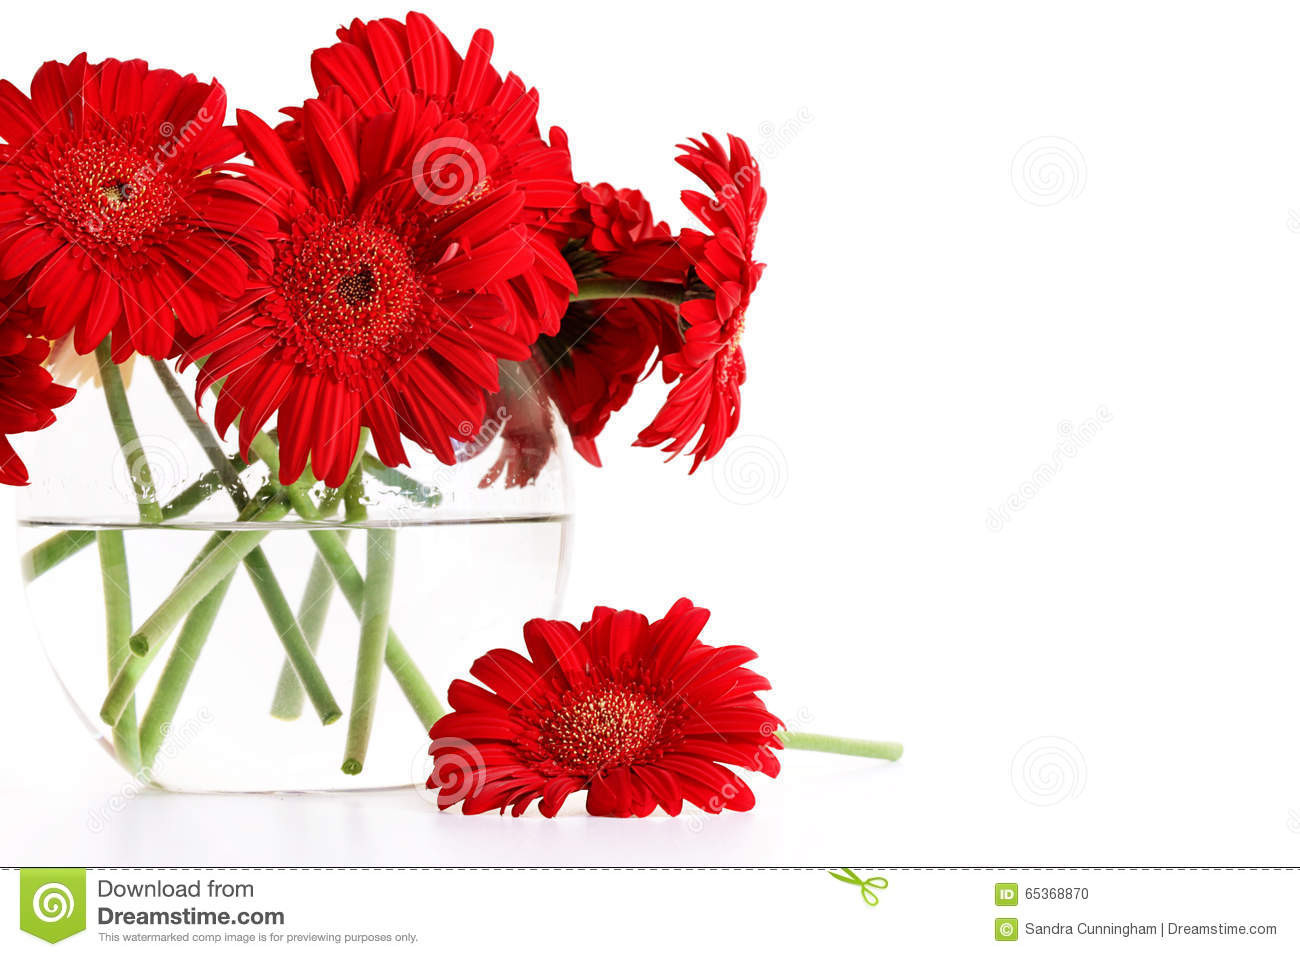 23 Trendy Red Glass Flower Vase 2024 free download red glass flower vase of closeup od red gerber daisies in vase stock photo image of close throughout closeup od red gerber daisies in glass vase